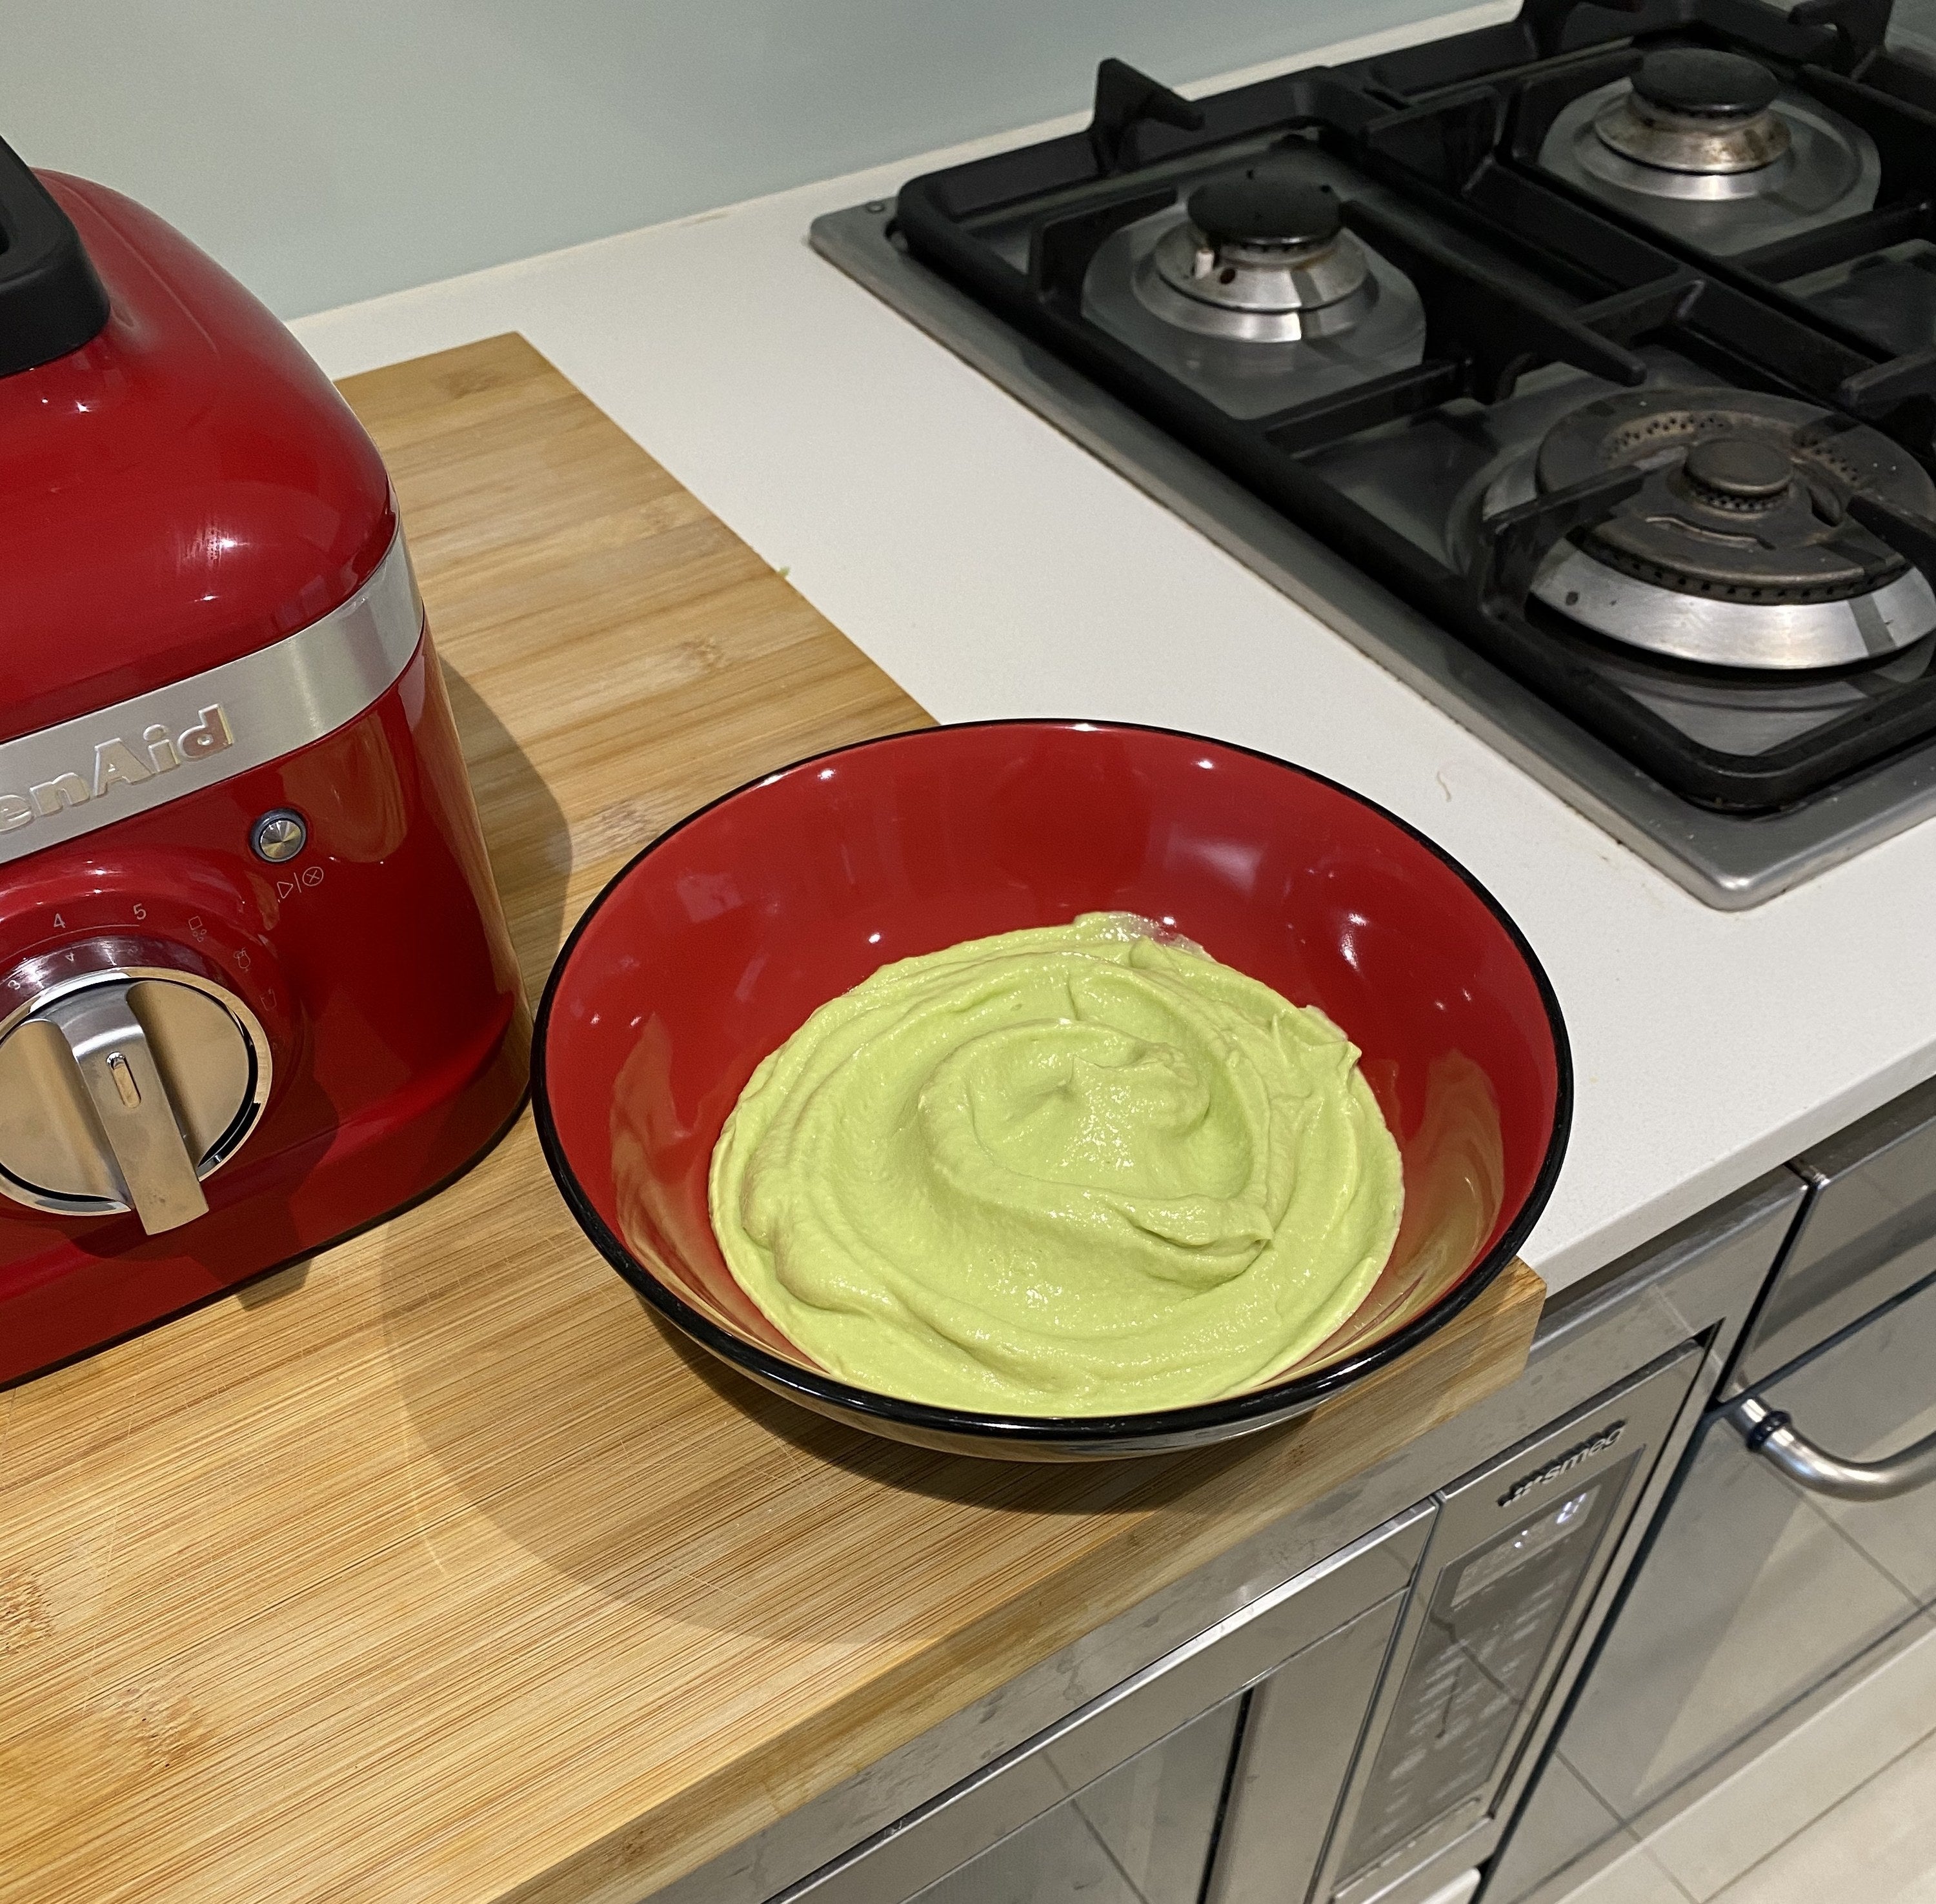 A bowl of smooth guacamole sitting on a bench next to a blender